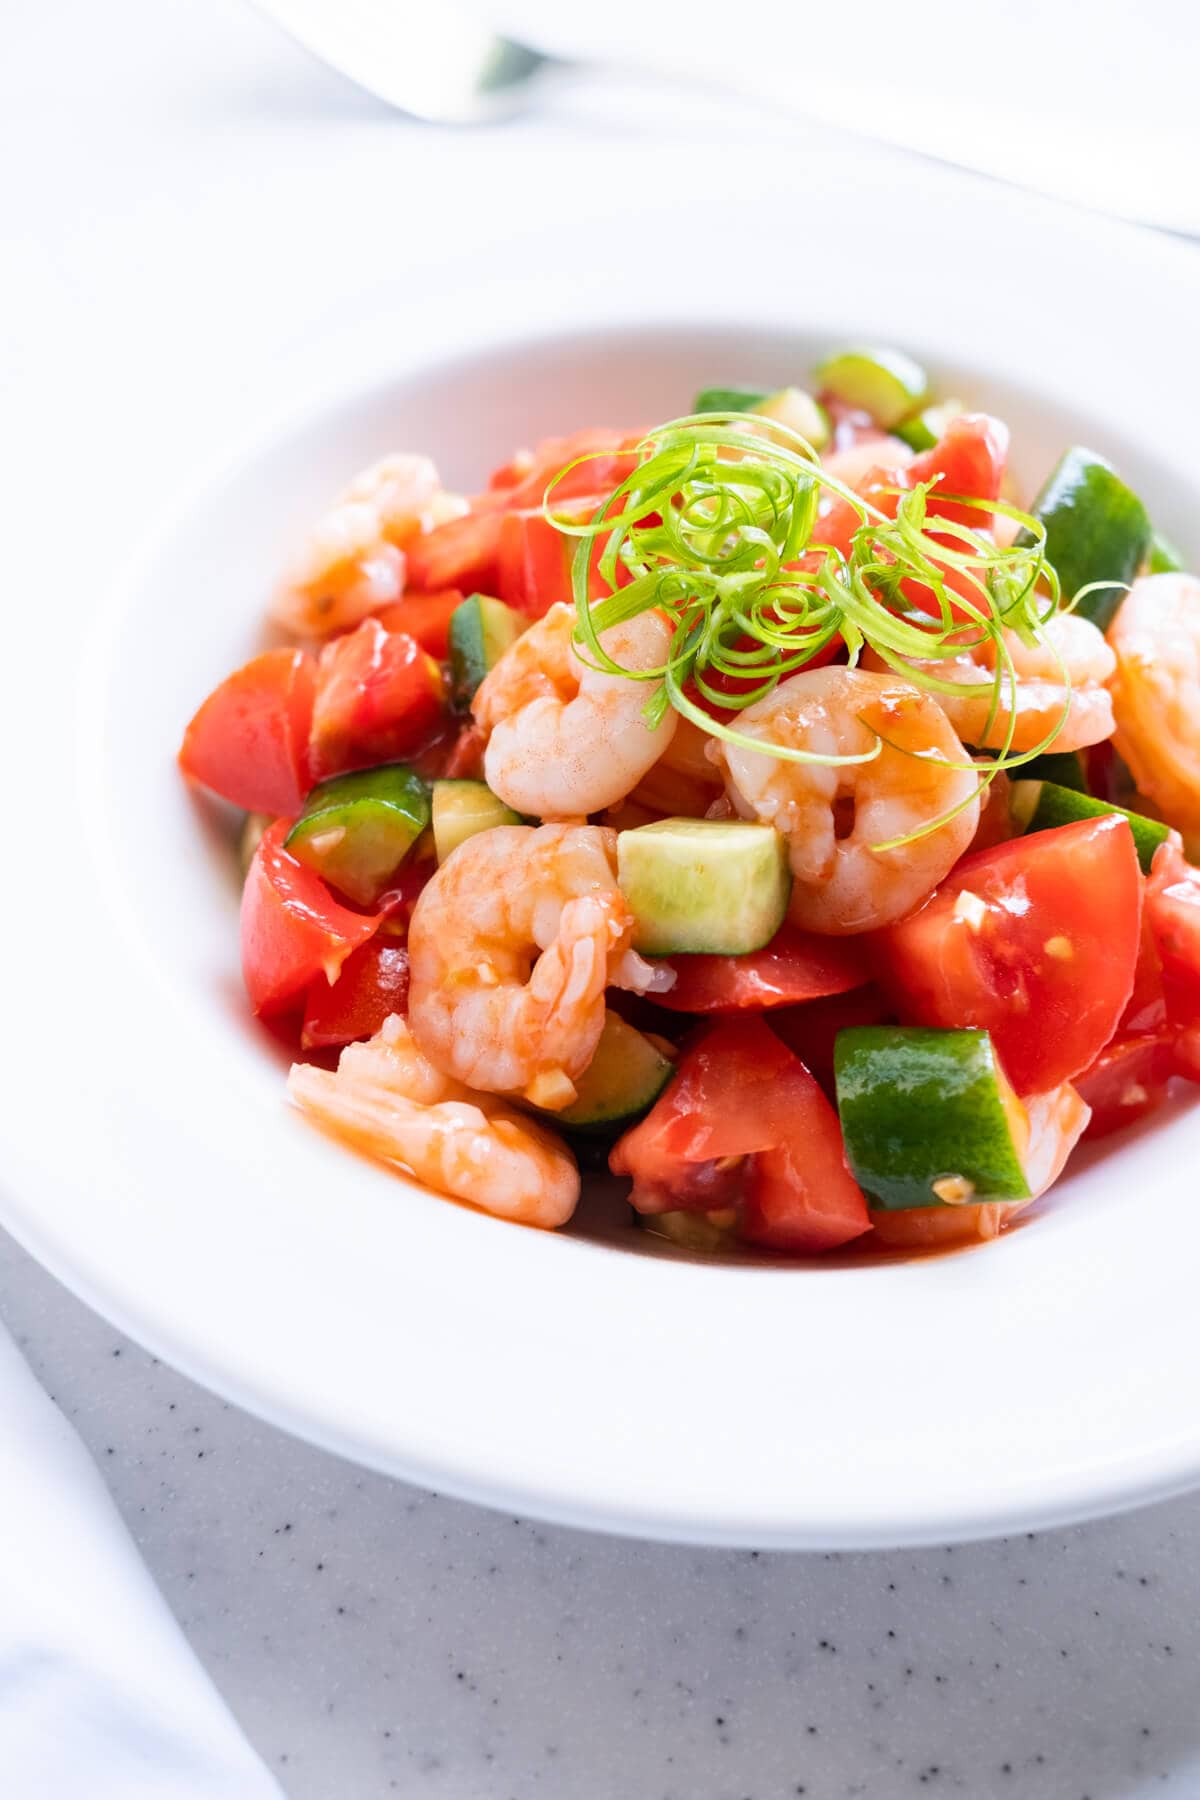 Tomato and shrimp salad with cucumber in a sweet and tangy ketchup dressing. 